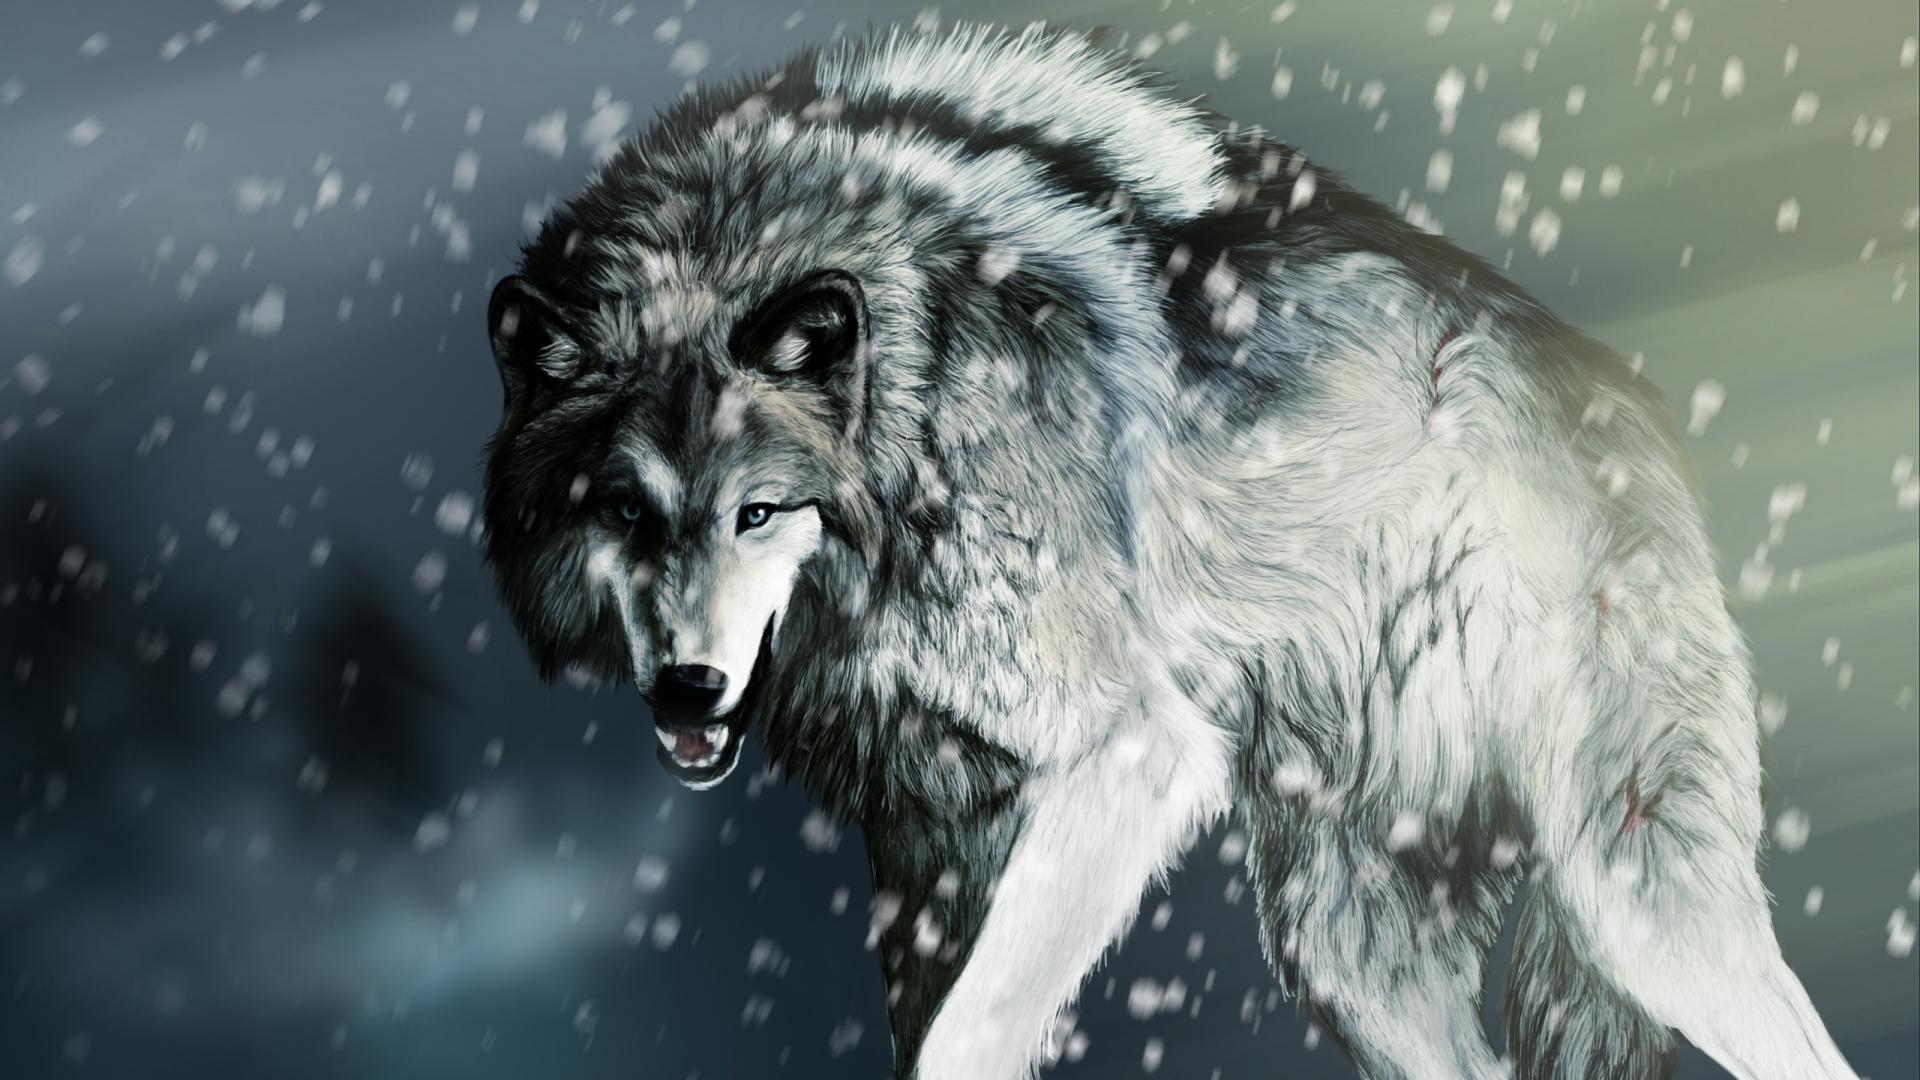 Free download Gray Wolf Wallpaper Gray Wolf Image Cool Wallpaper